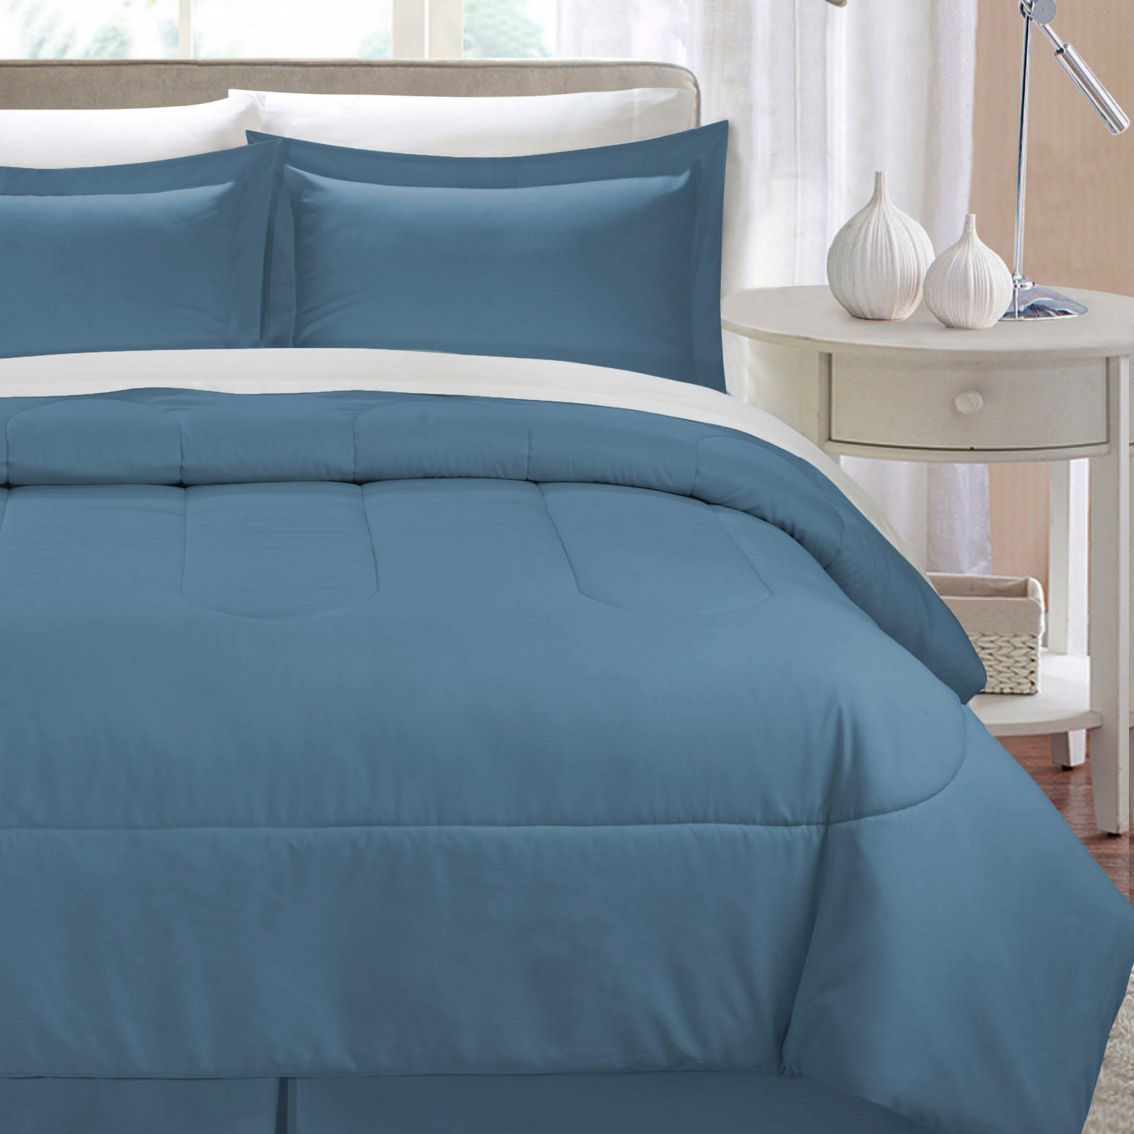 Swift Home Lightweight 8 Pc. Bed In a Bag Comforter Set - Image 2 of 3